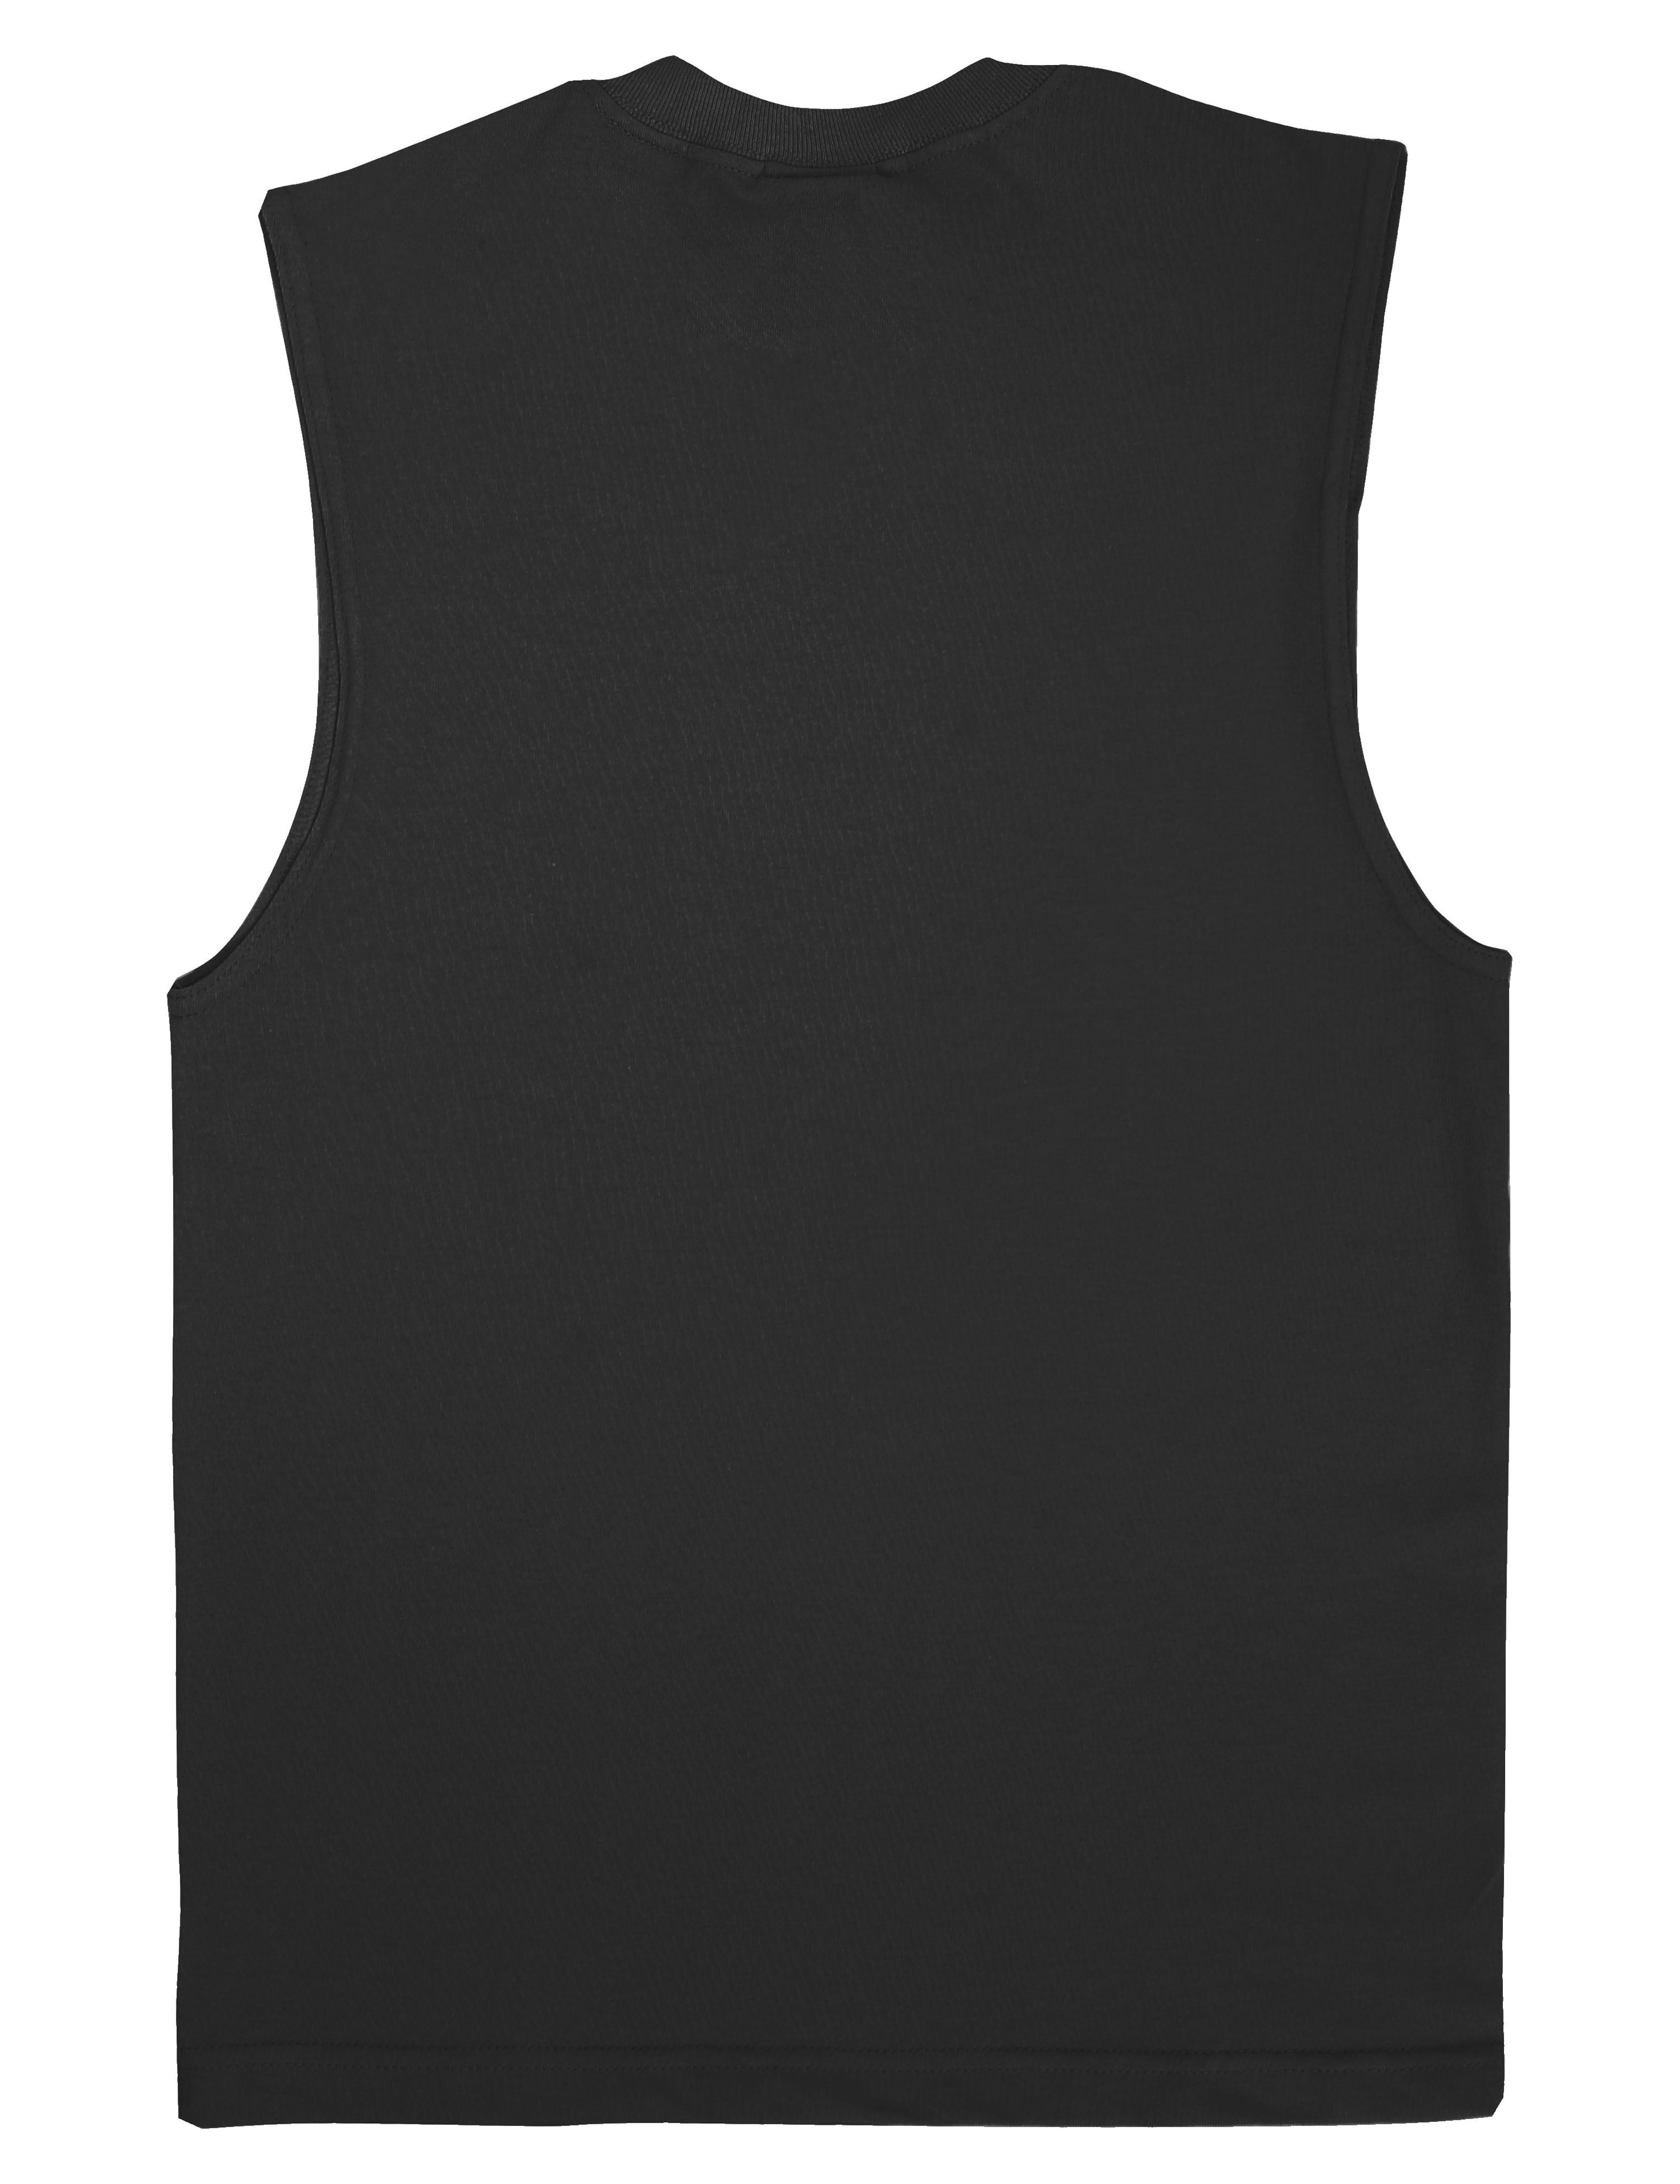 Hat and Beyond Men's Muscle Gym Tank Top Sleeveless T-Shirts - image 4 of 5